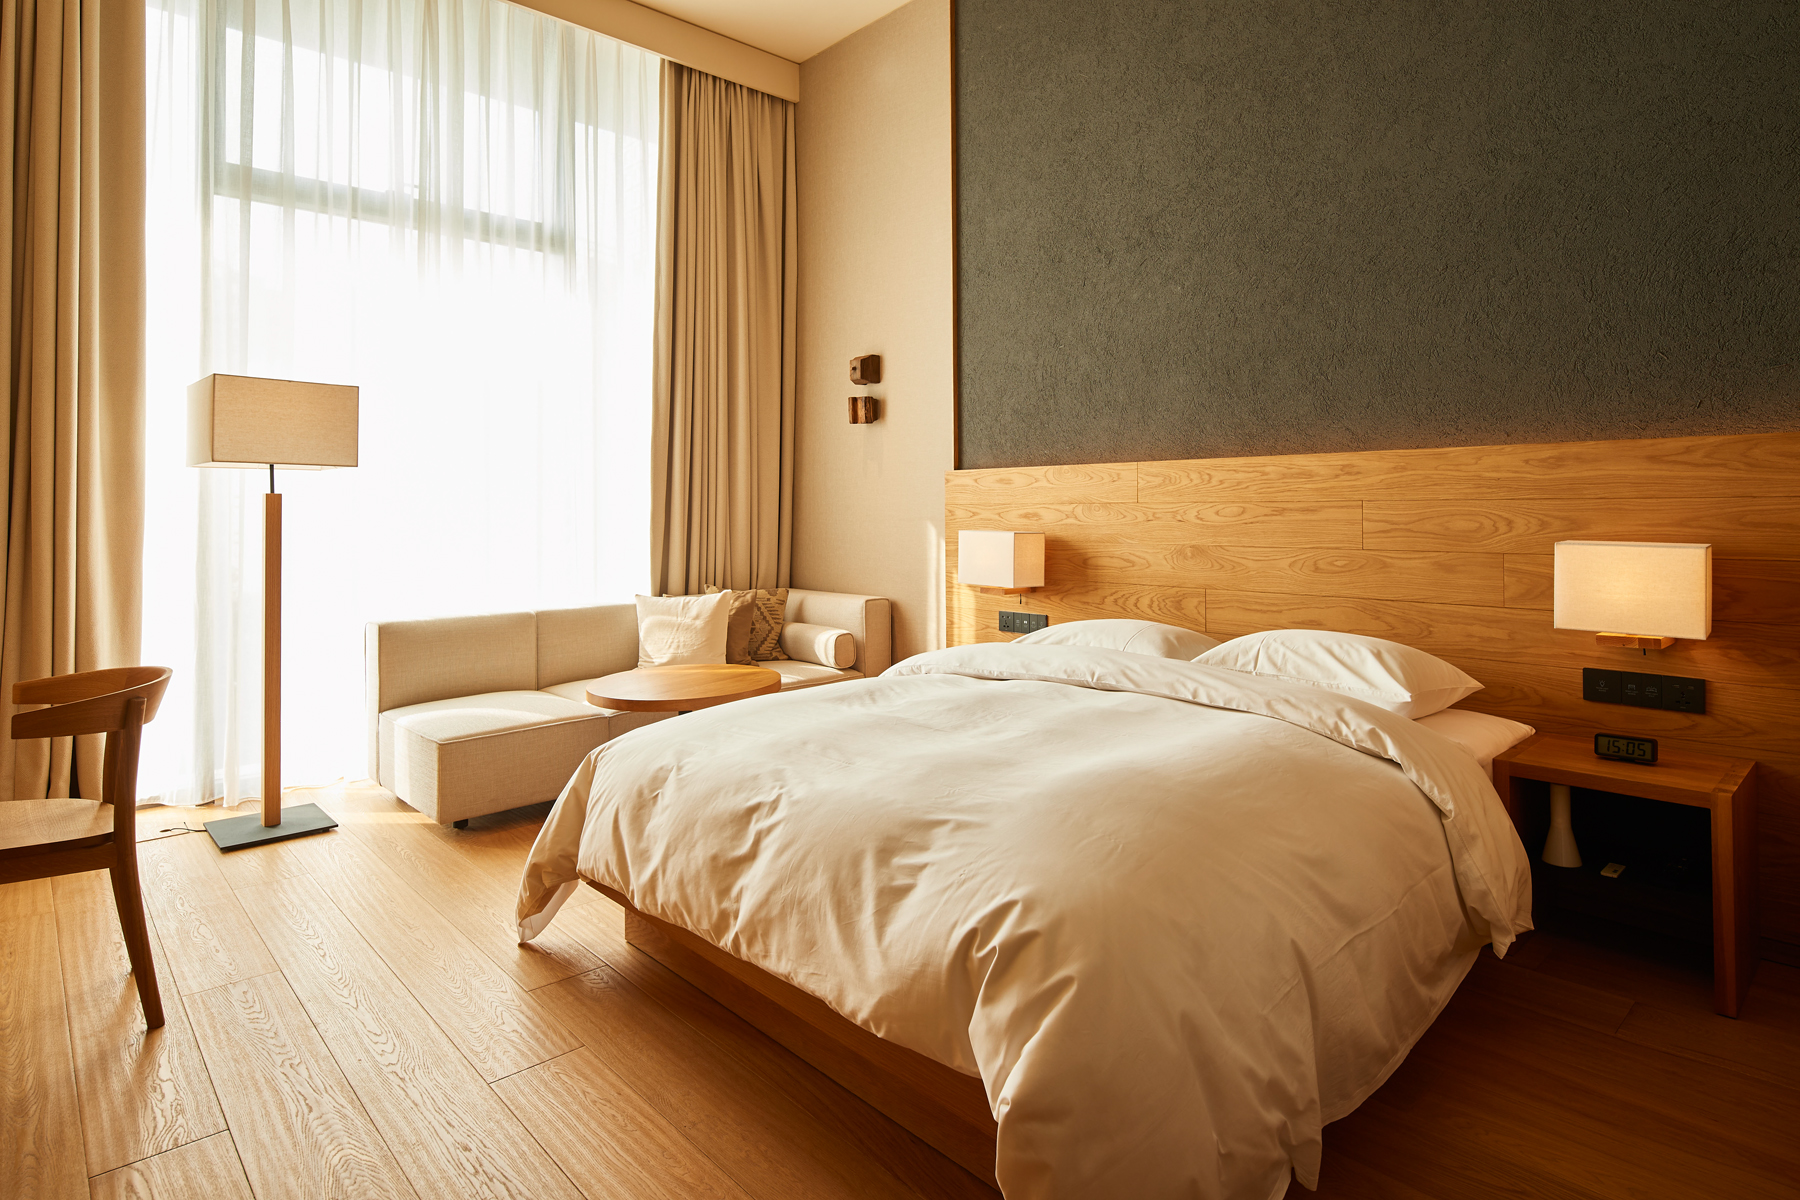 MUJI Hotel Shenzhen is a holistic haven from the world